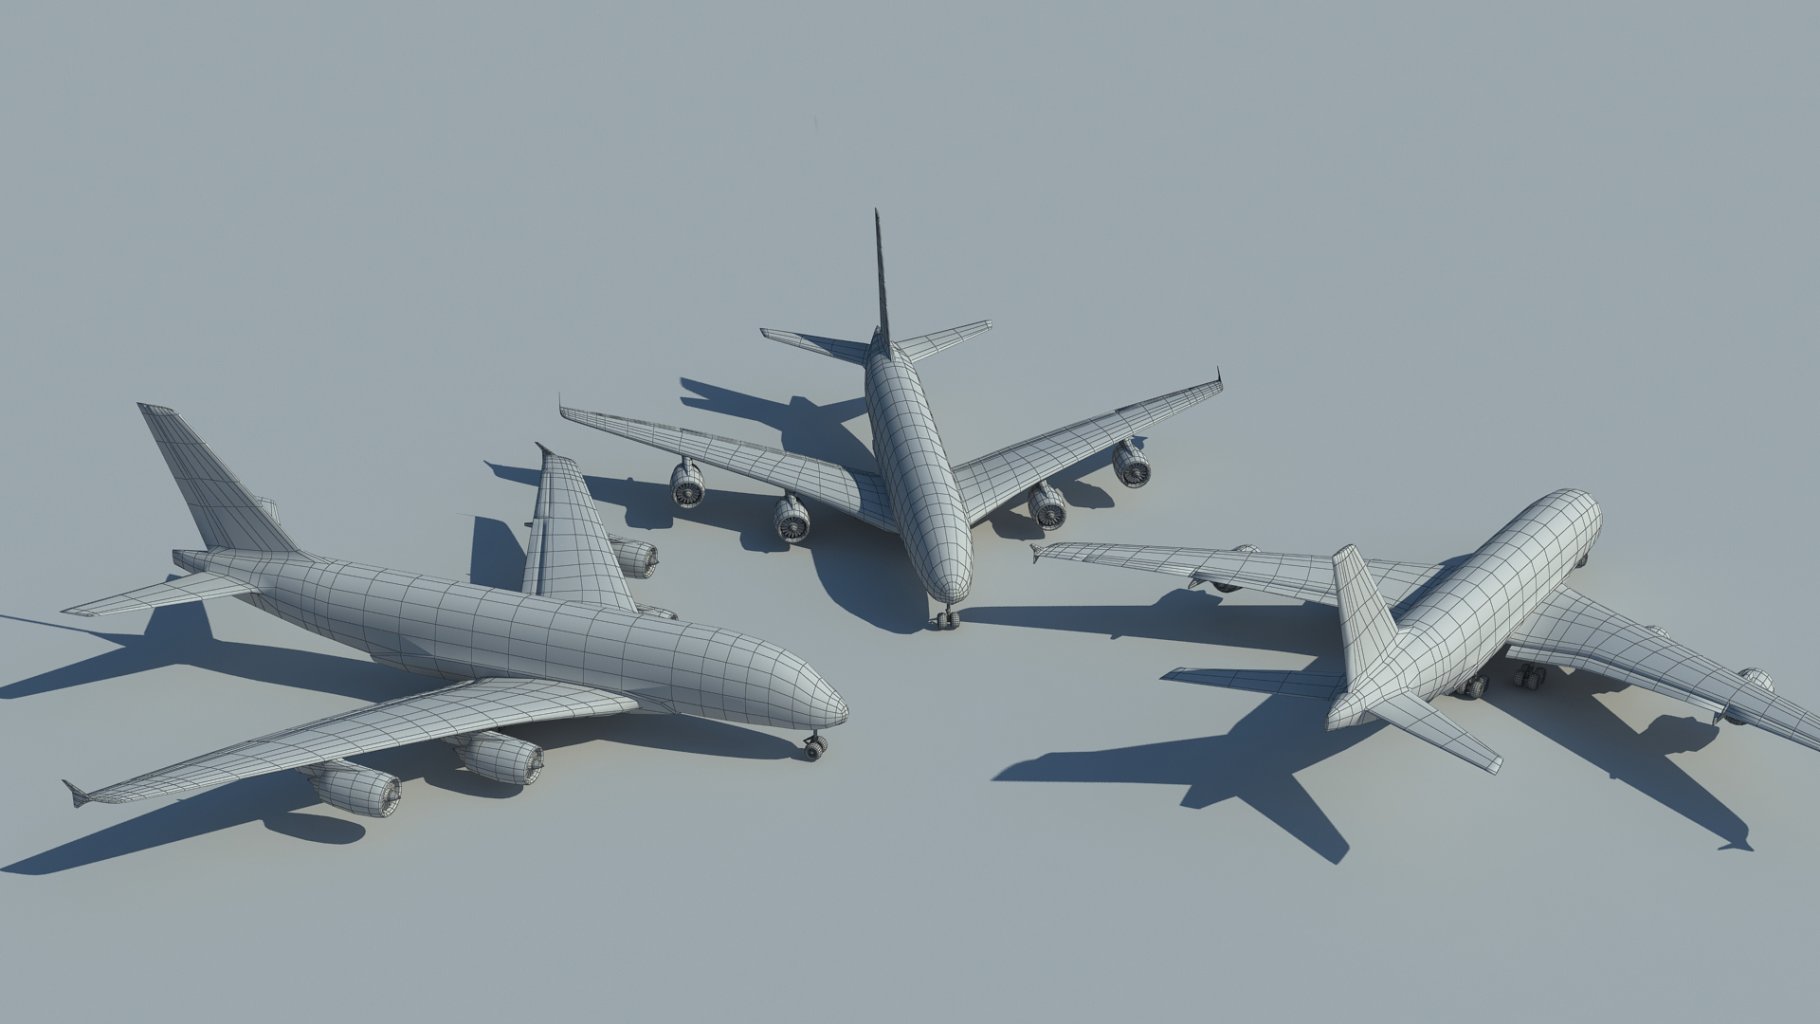 Rendering of a wonderful low poly 3d model of aircraft without textures